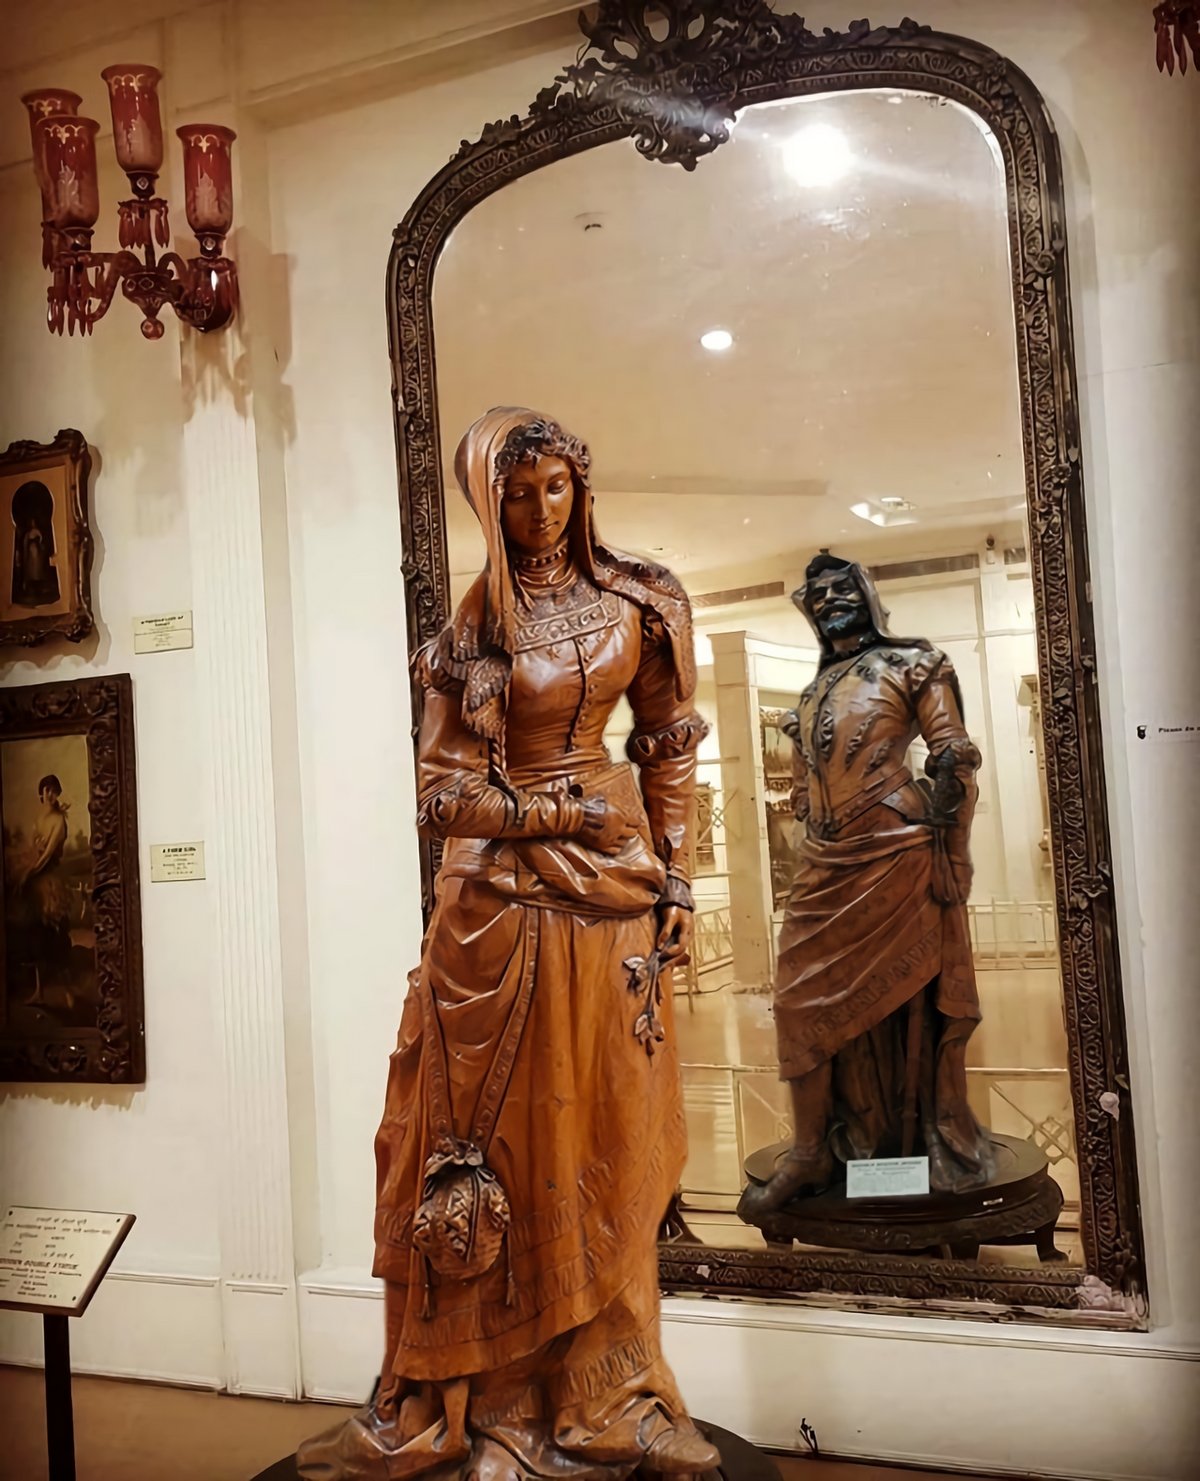 The double statue of mephistopheles and margaretta